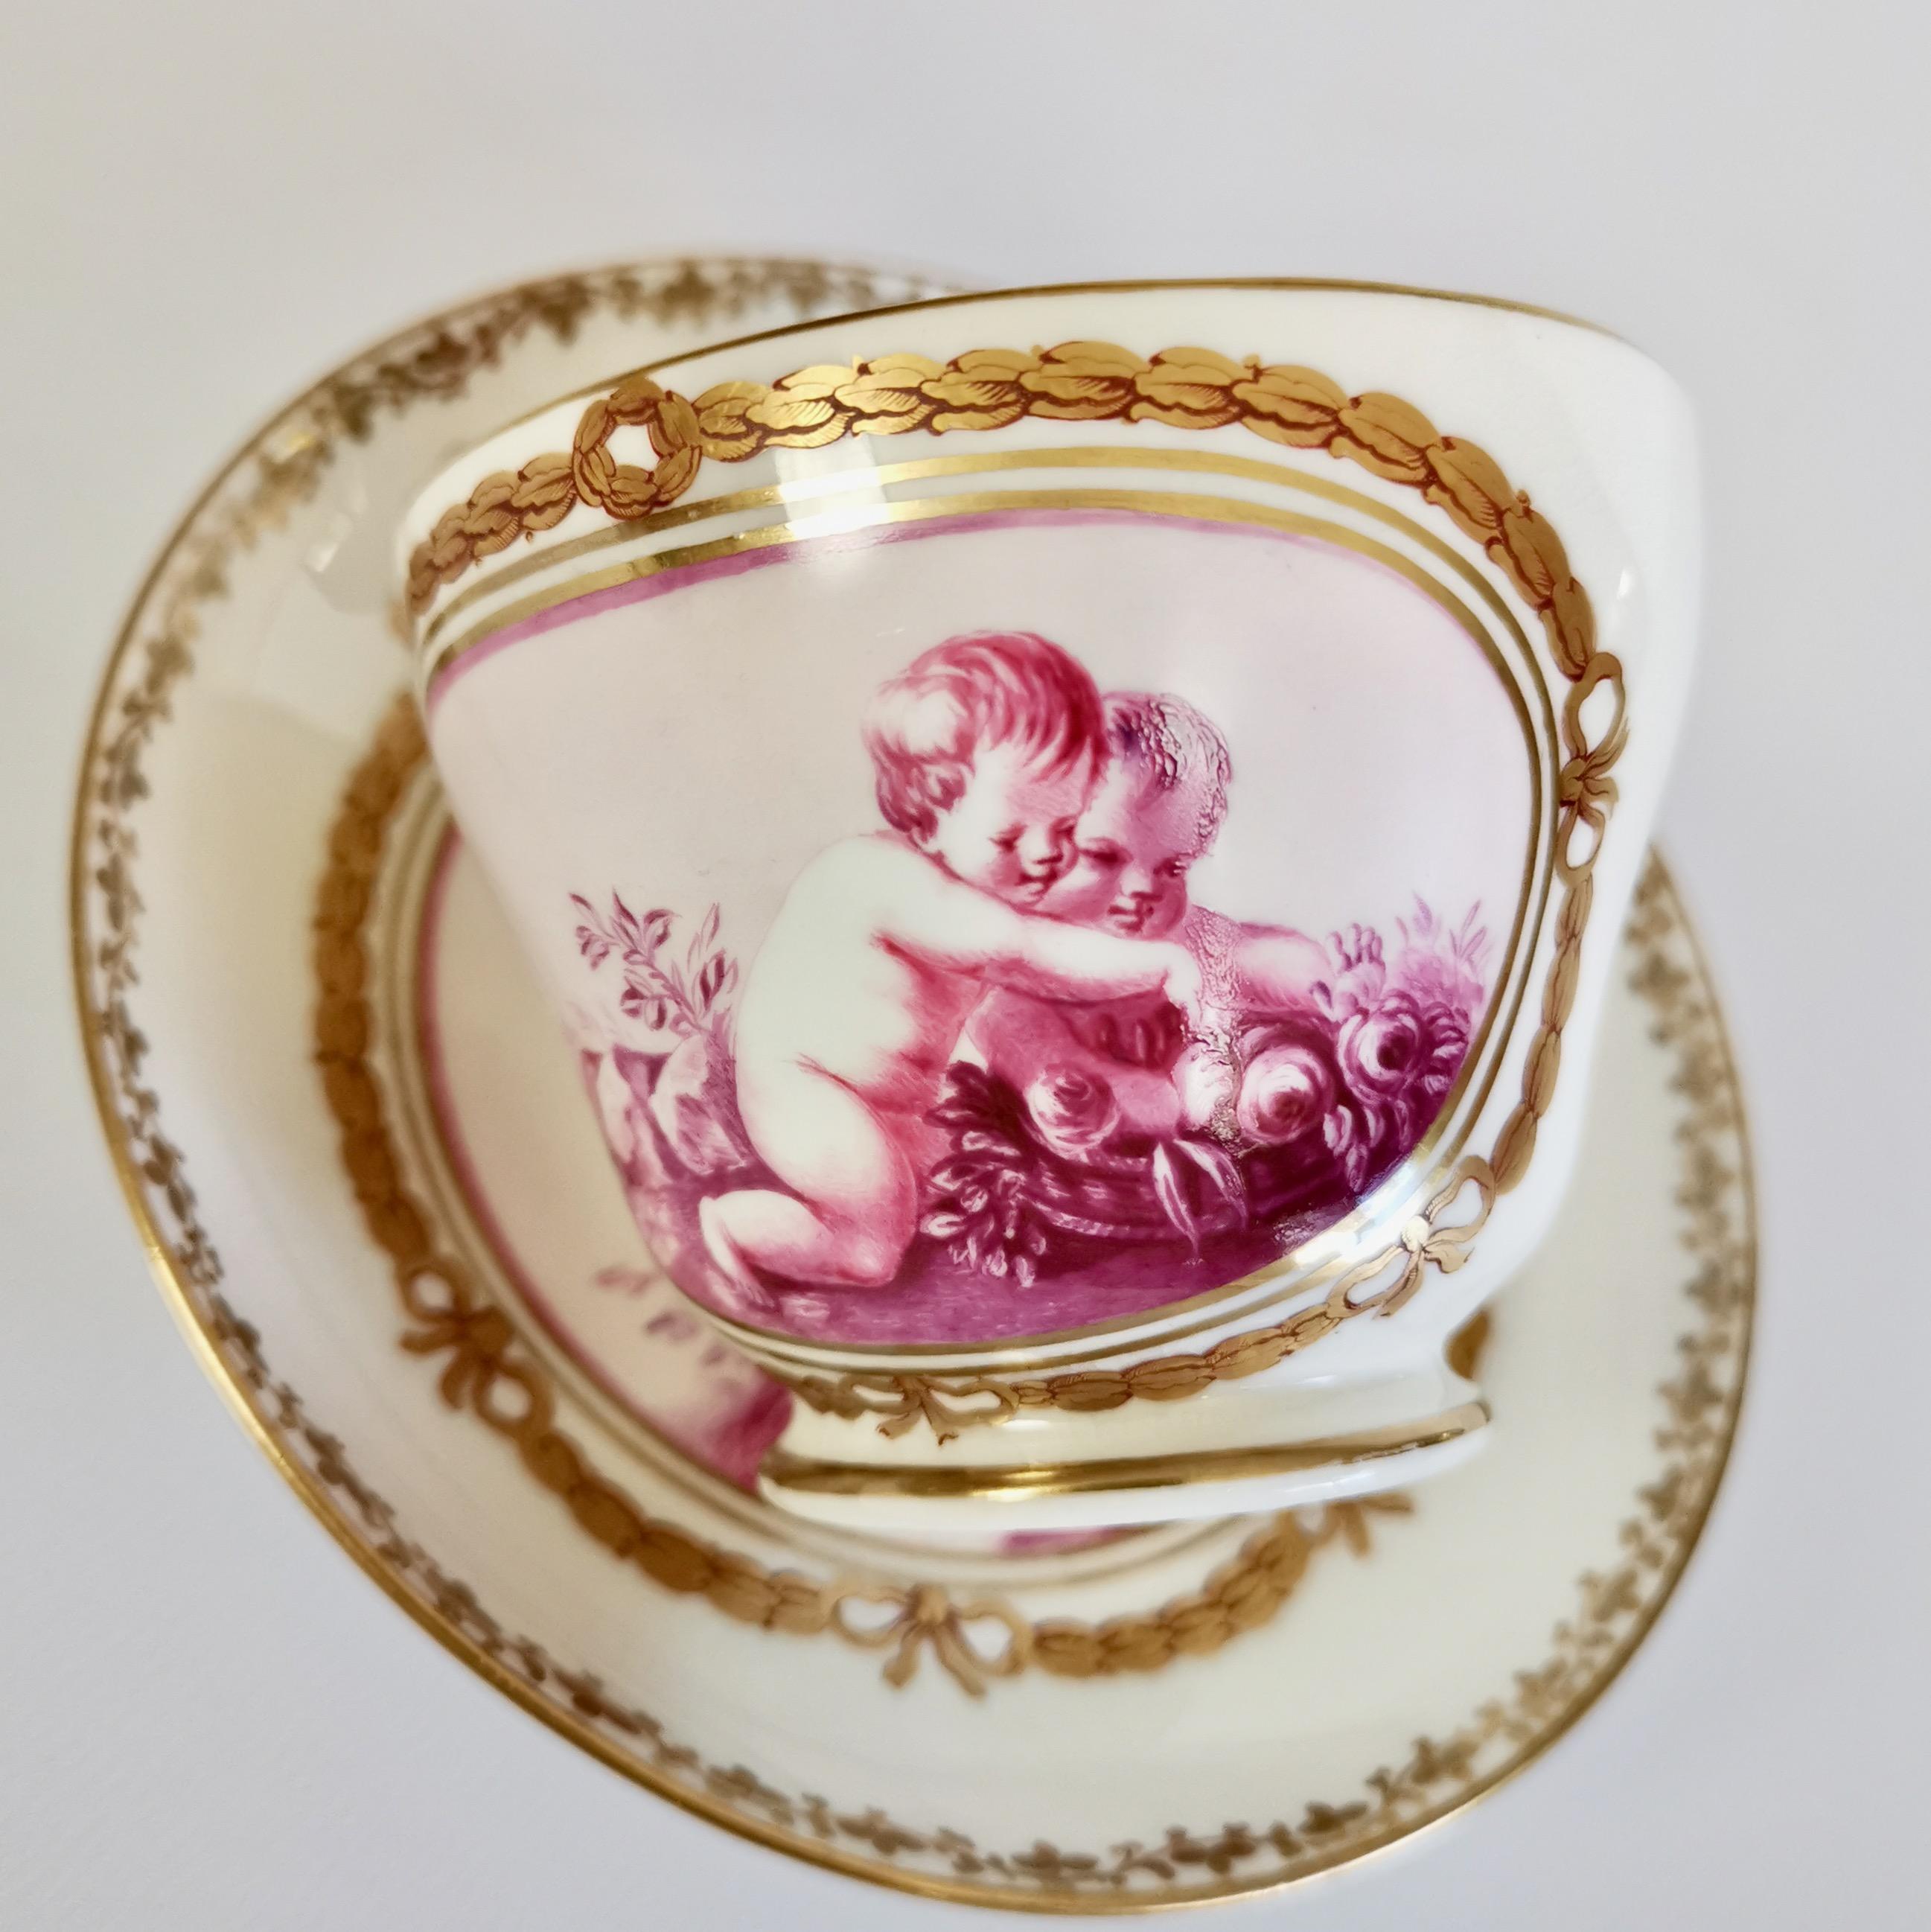 Kerr & Binns Worcester Porcelain Cup and Saucer, Puce Putti Playing, circa 1855 4